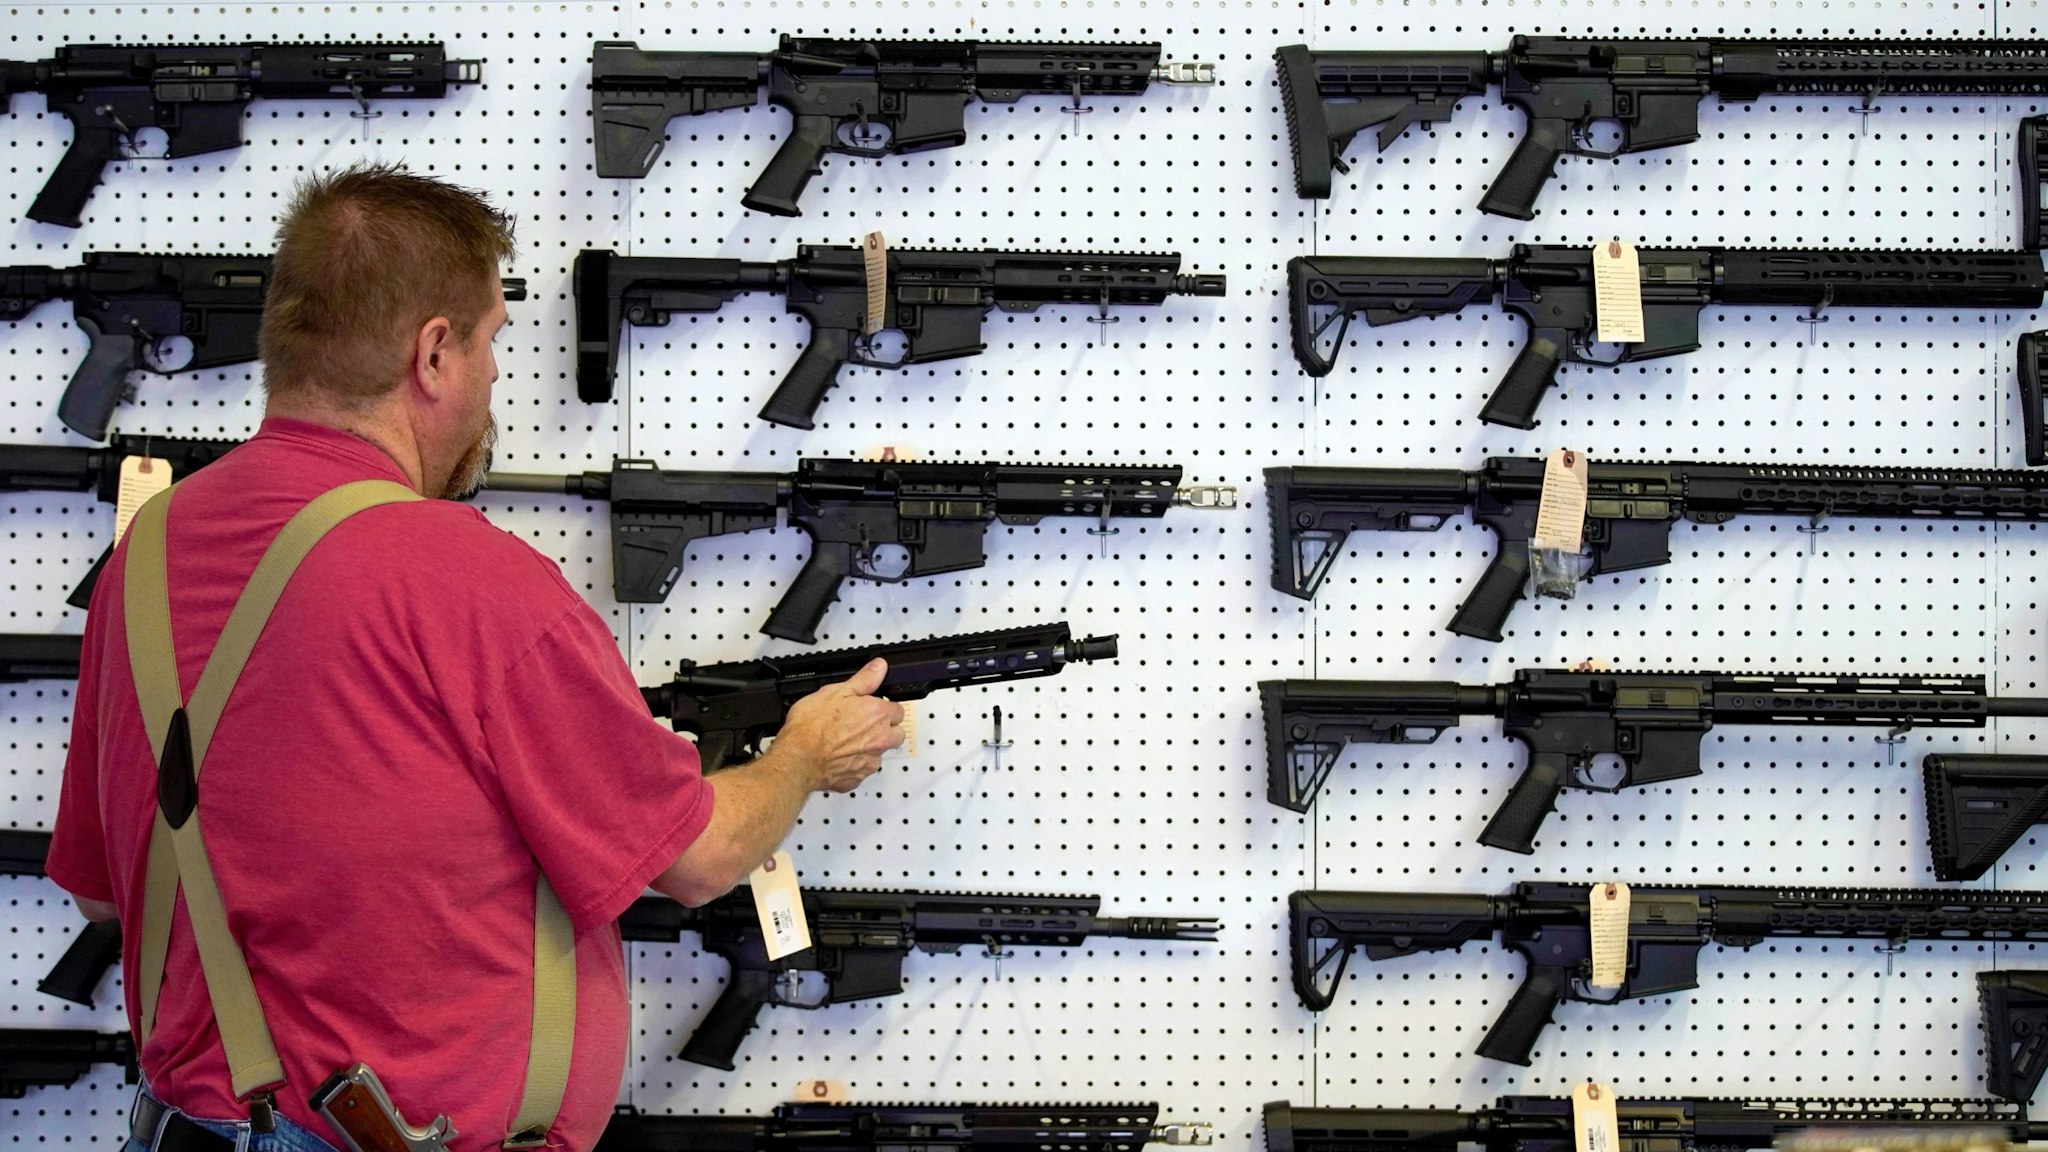 A worker restocks AR-15 guns at Davidson Defense in Orem, Utah on March 20, 2020. - Gun stores in the US are reporting a surge in sales of firearms as coronavirus fears trigger personal safety concerns.